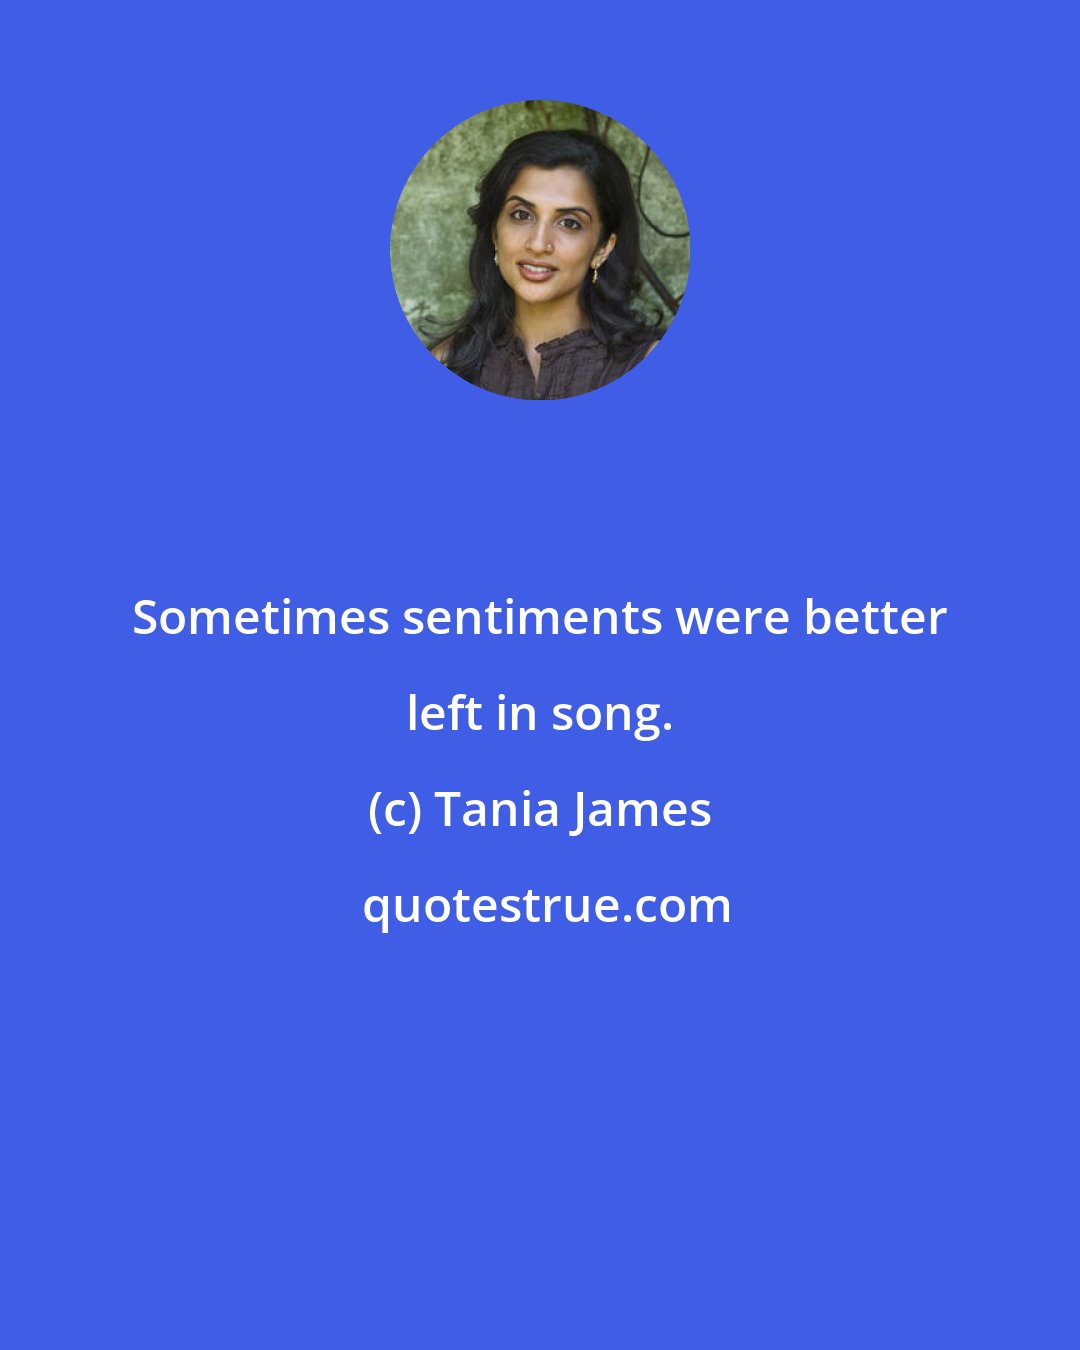 Tania James: Sometimes sentiments were better left in song.